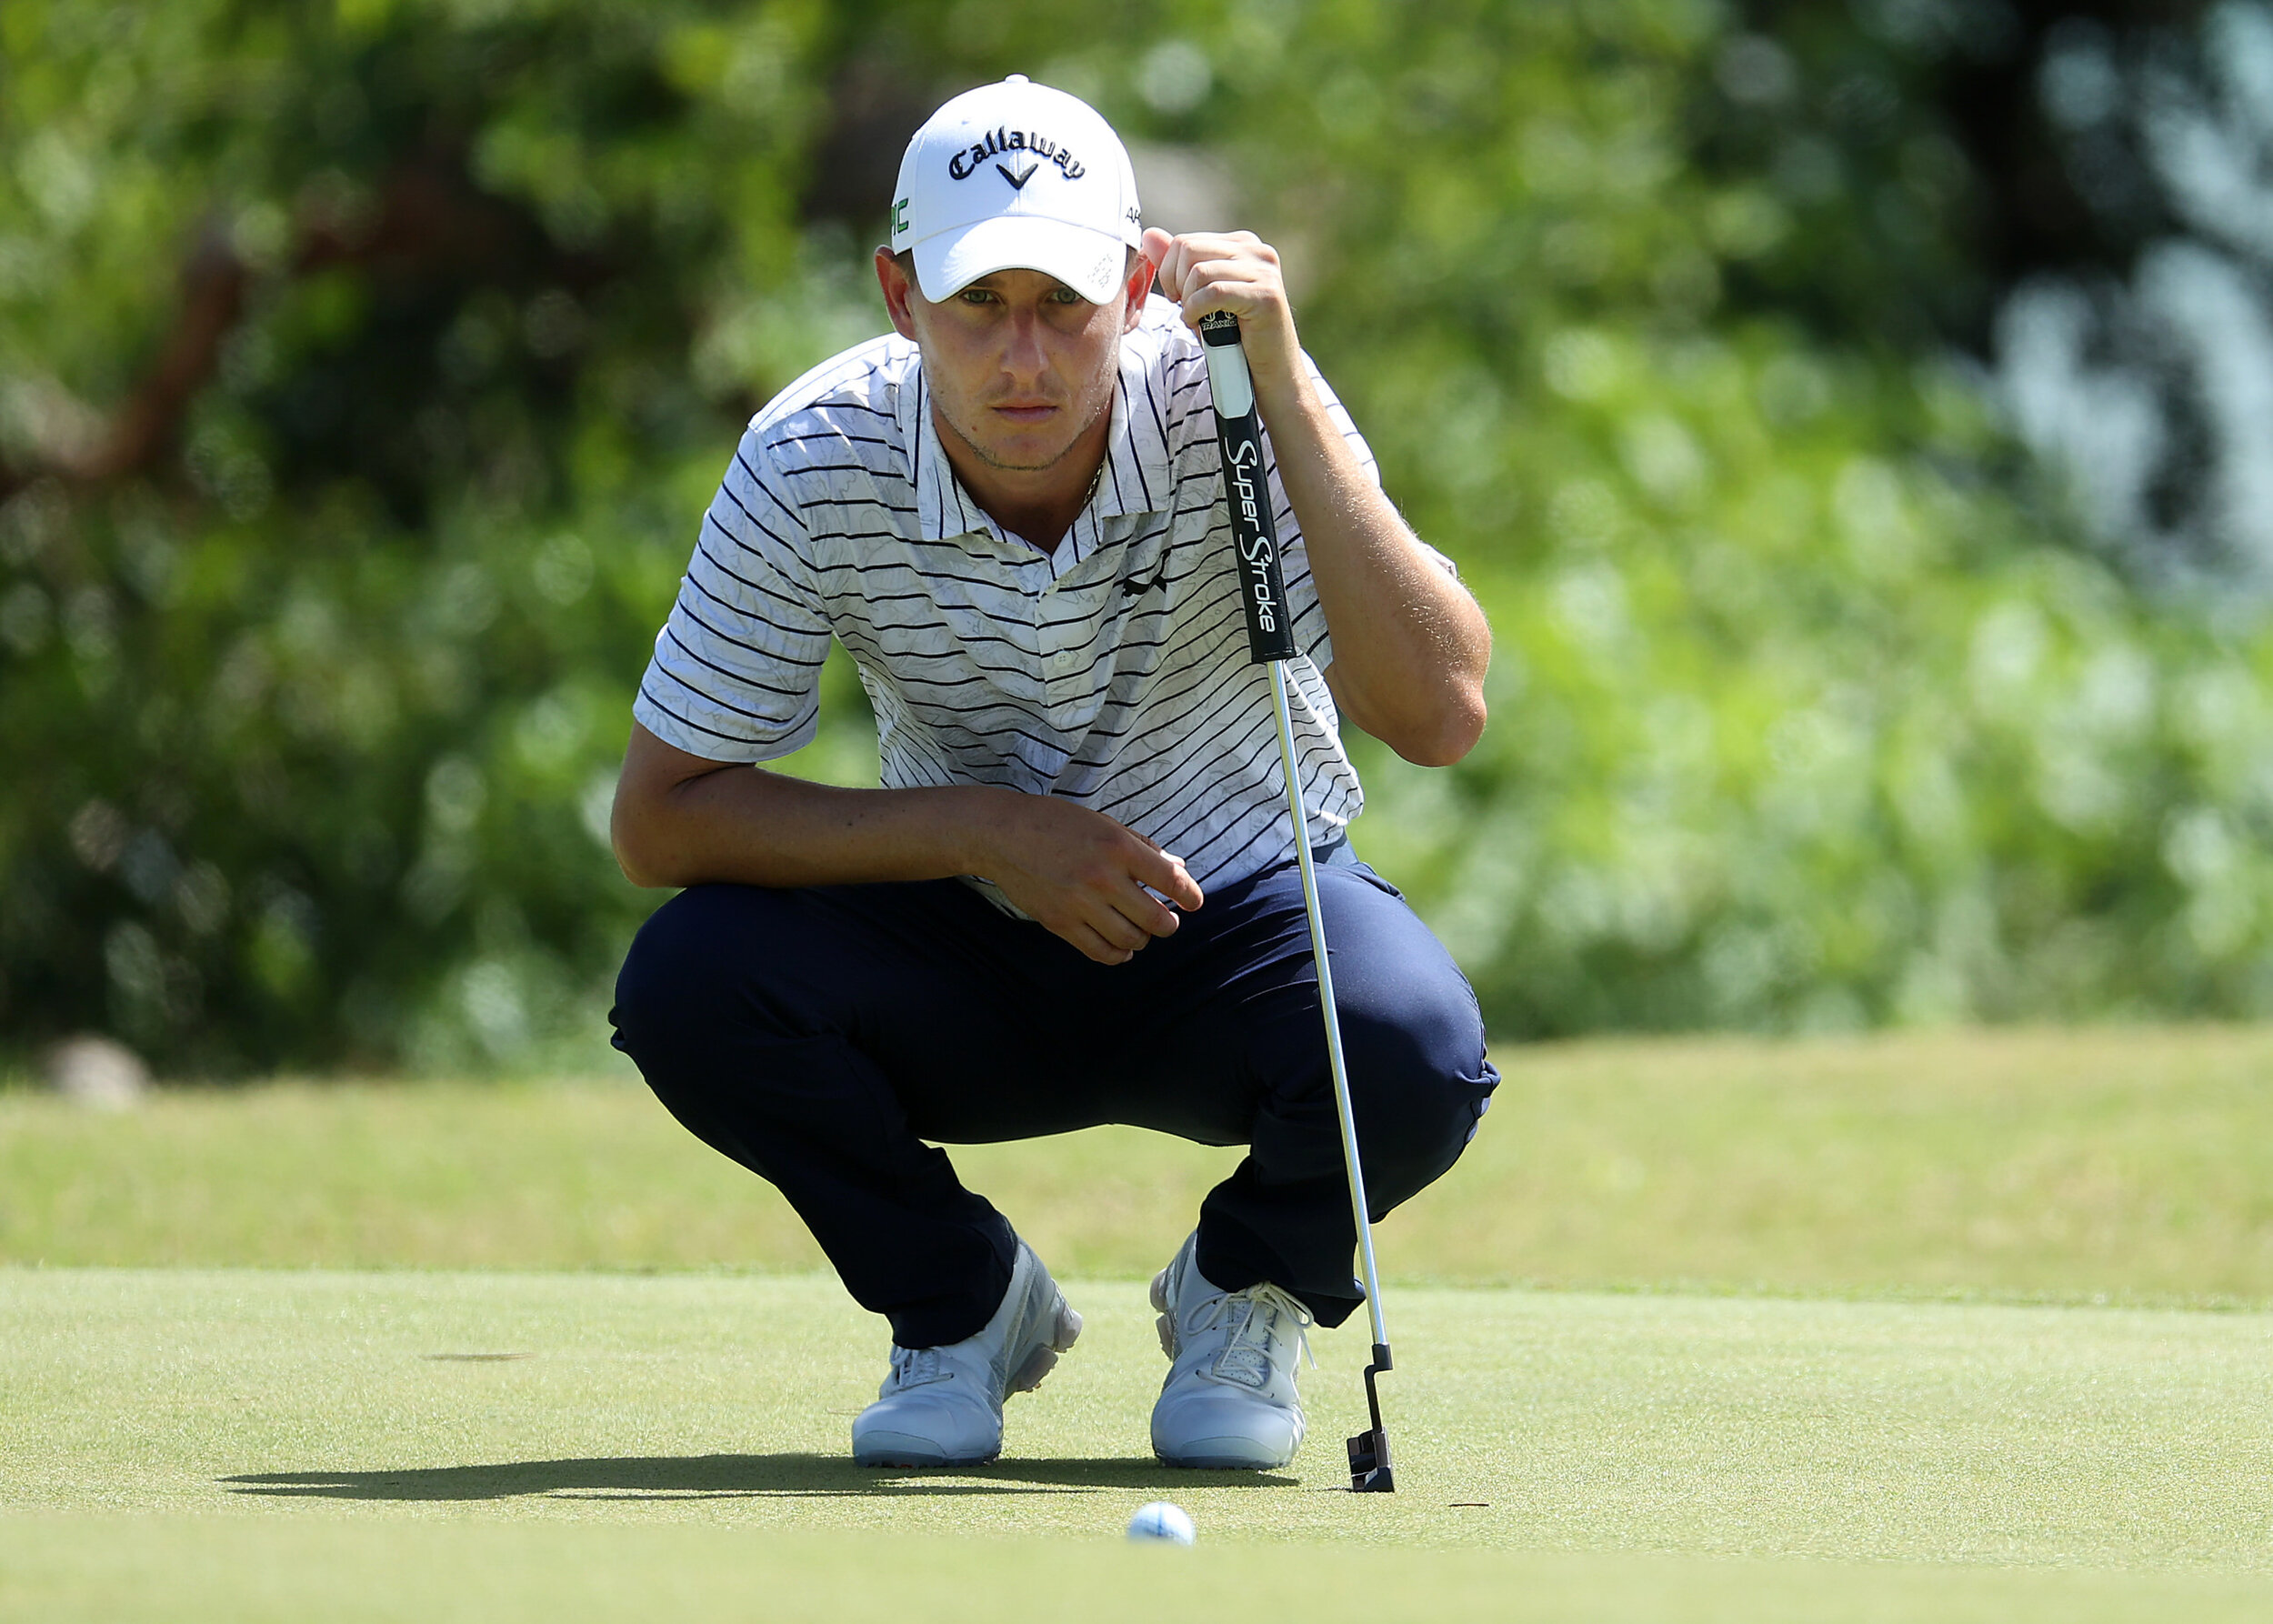  RIO GRANDE, PUERTO RICO - FEBRUARY 25: Emiliano Grillo of Argentina prepares to putt on the 15th green during the first round of the Puerto Rico Open at Grand Reserve Country Club on February 25, 2021 in Rio Grande, Puerto Rico.  (Photo by Andy Lyon